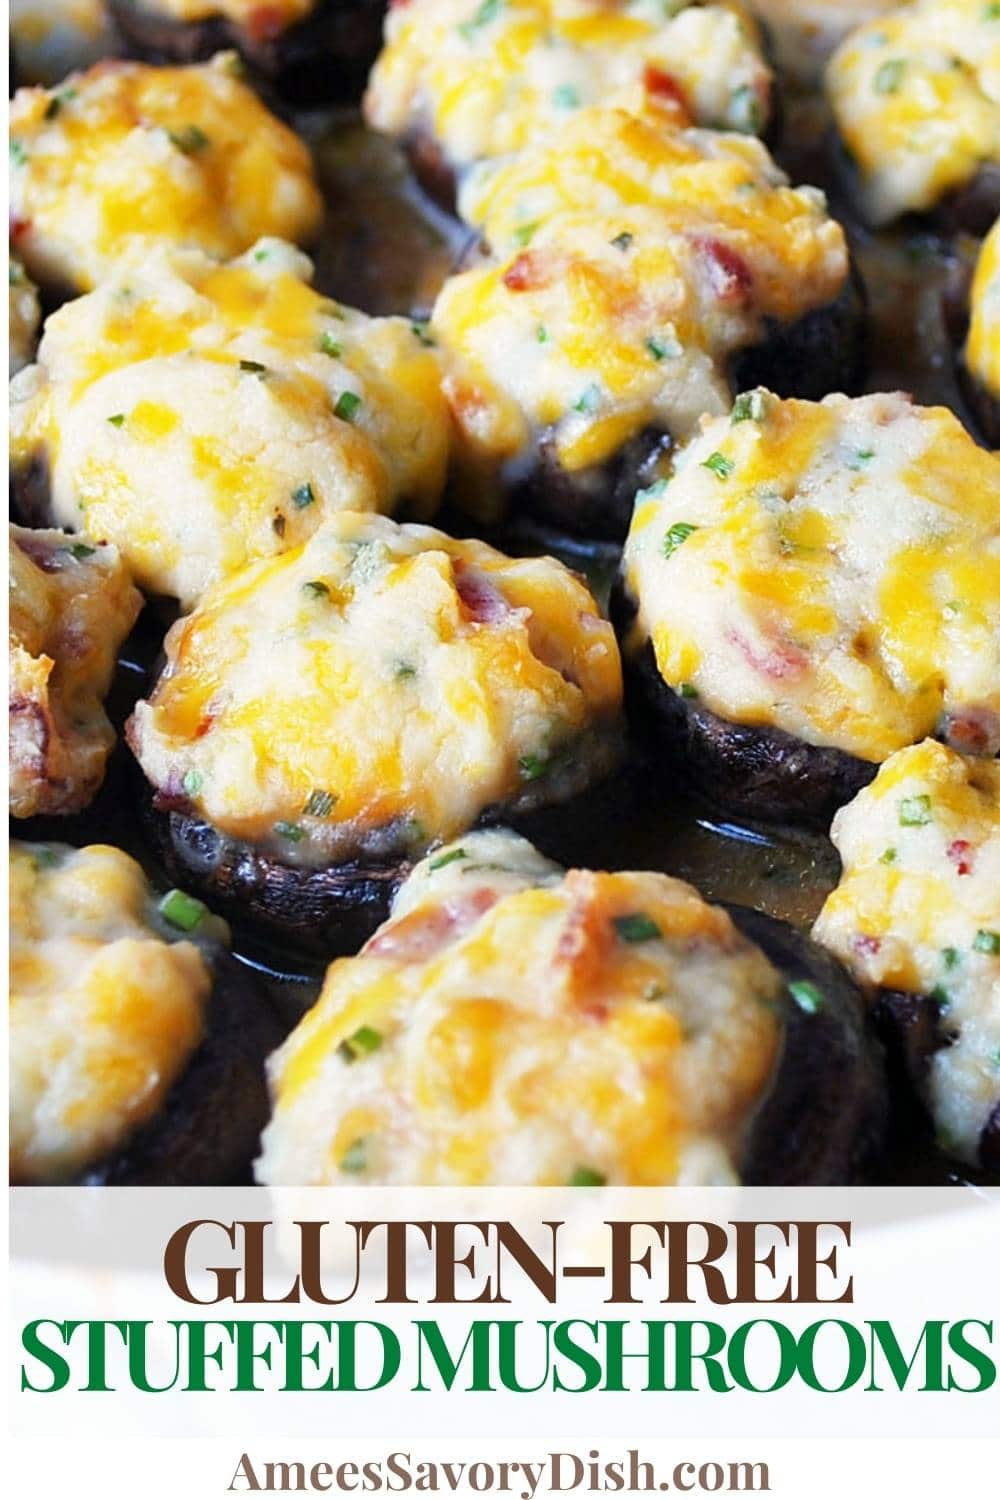 These Gluten-Free Stuffed Mushrooms are unlike any stuffed mushroom you've had before! Portobello caps are stuffed with bacon & cheddar mashed potatoes and then baked to perfection. via @Ameessavorydish